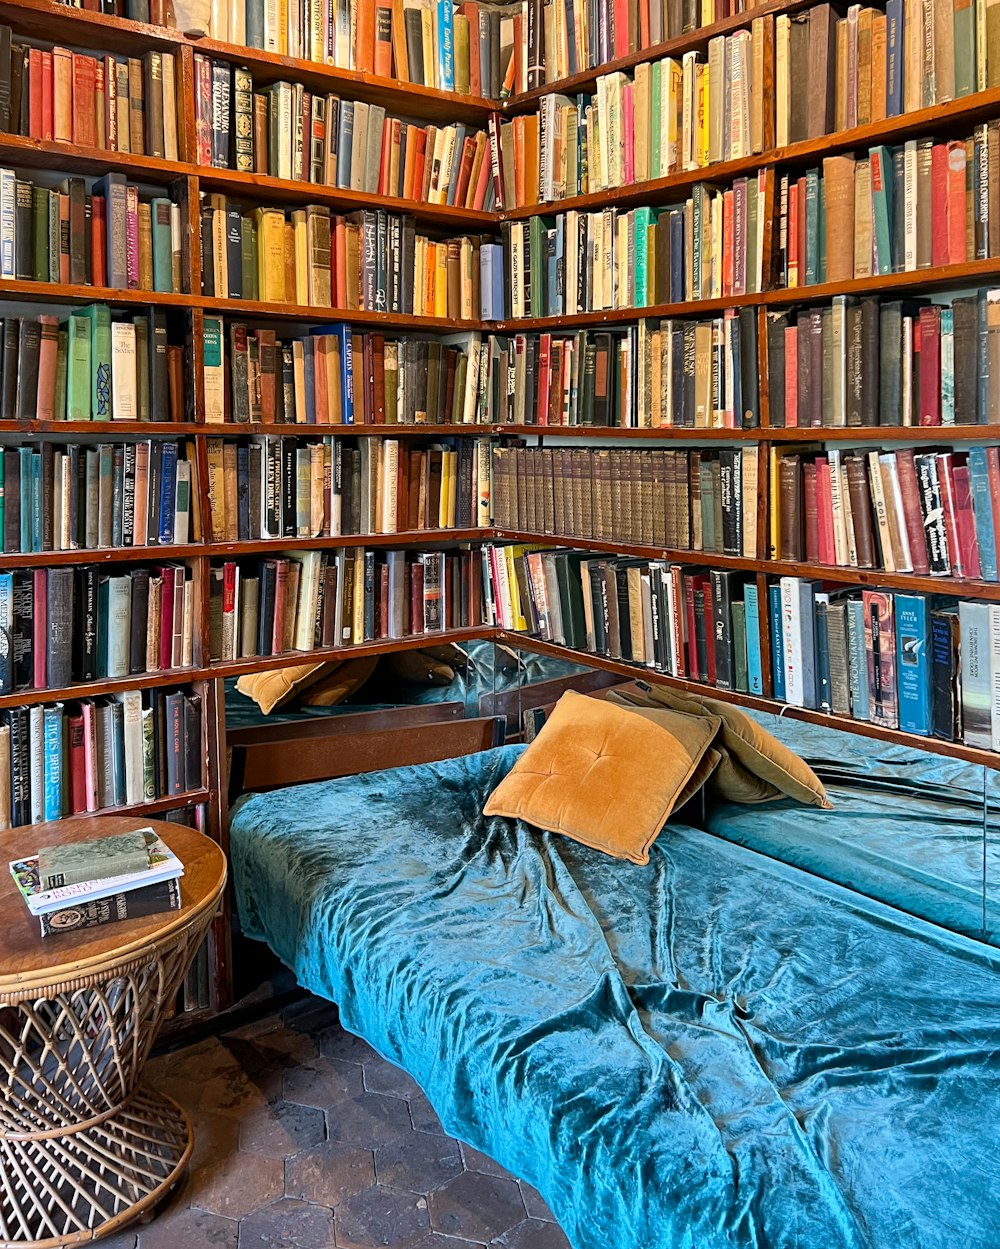 a bed in a room with a lot of books on the shelves